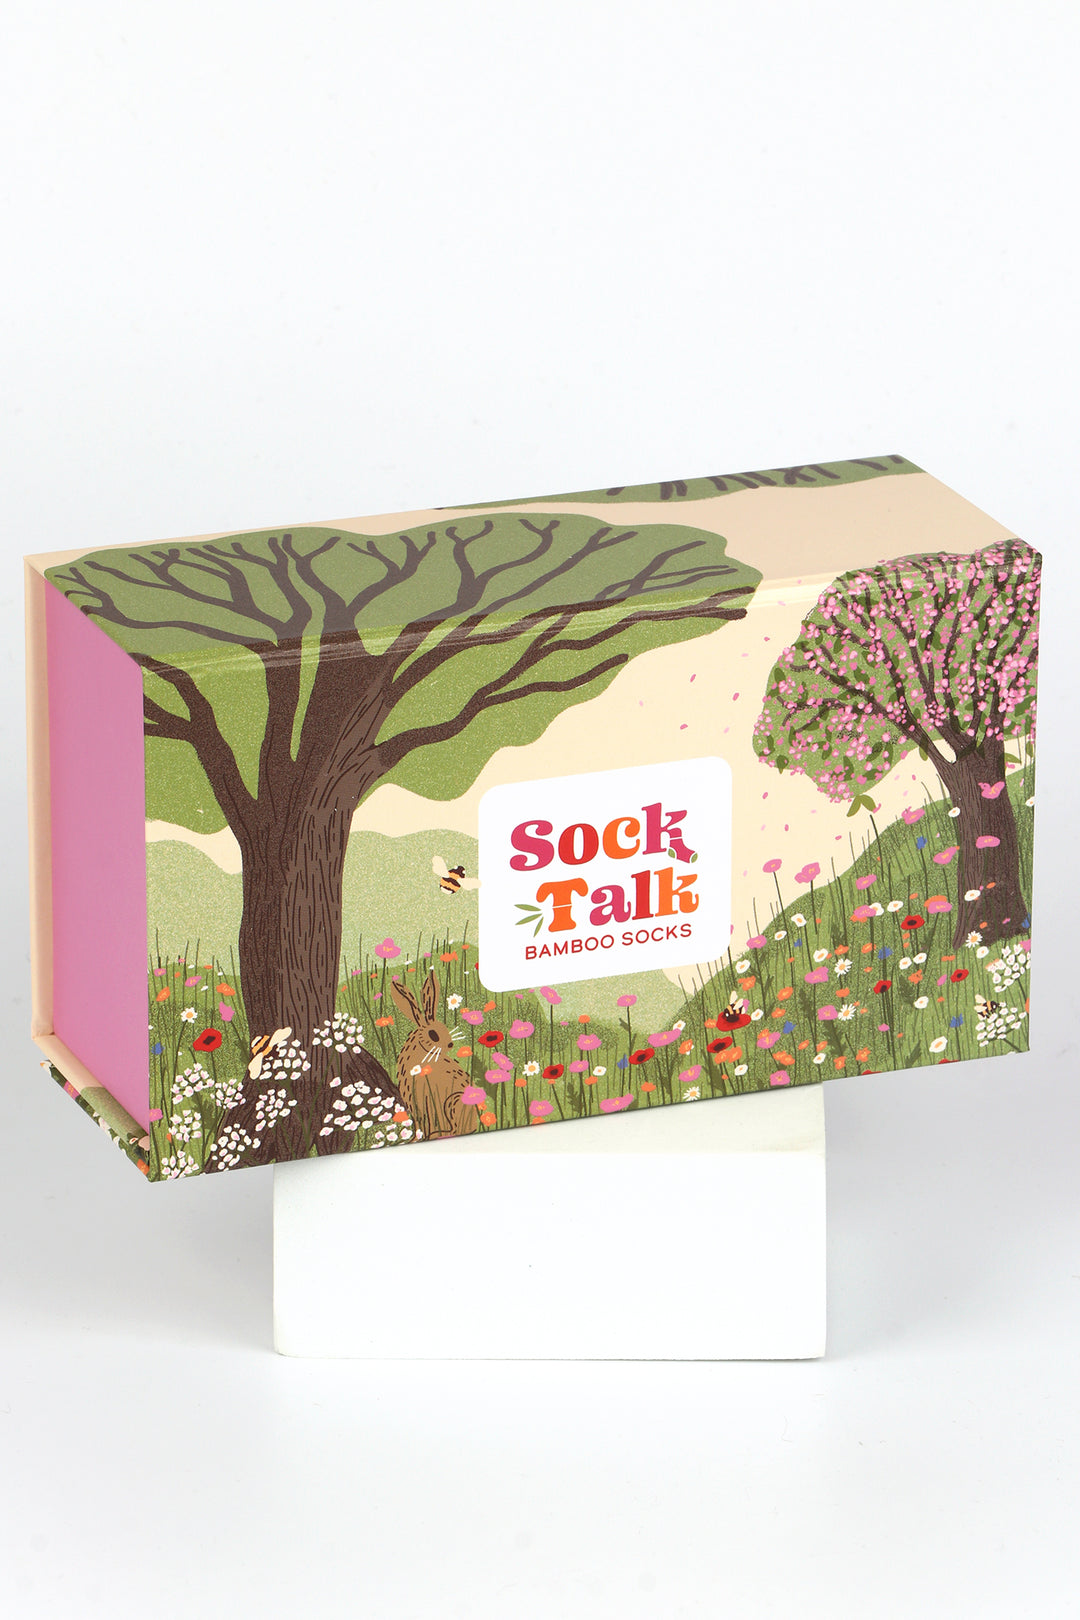 sock talk gift box designed to look like a summer meadow with bees, flowers and trees